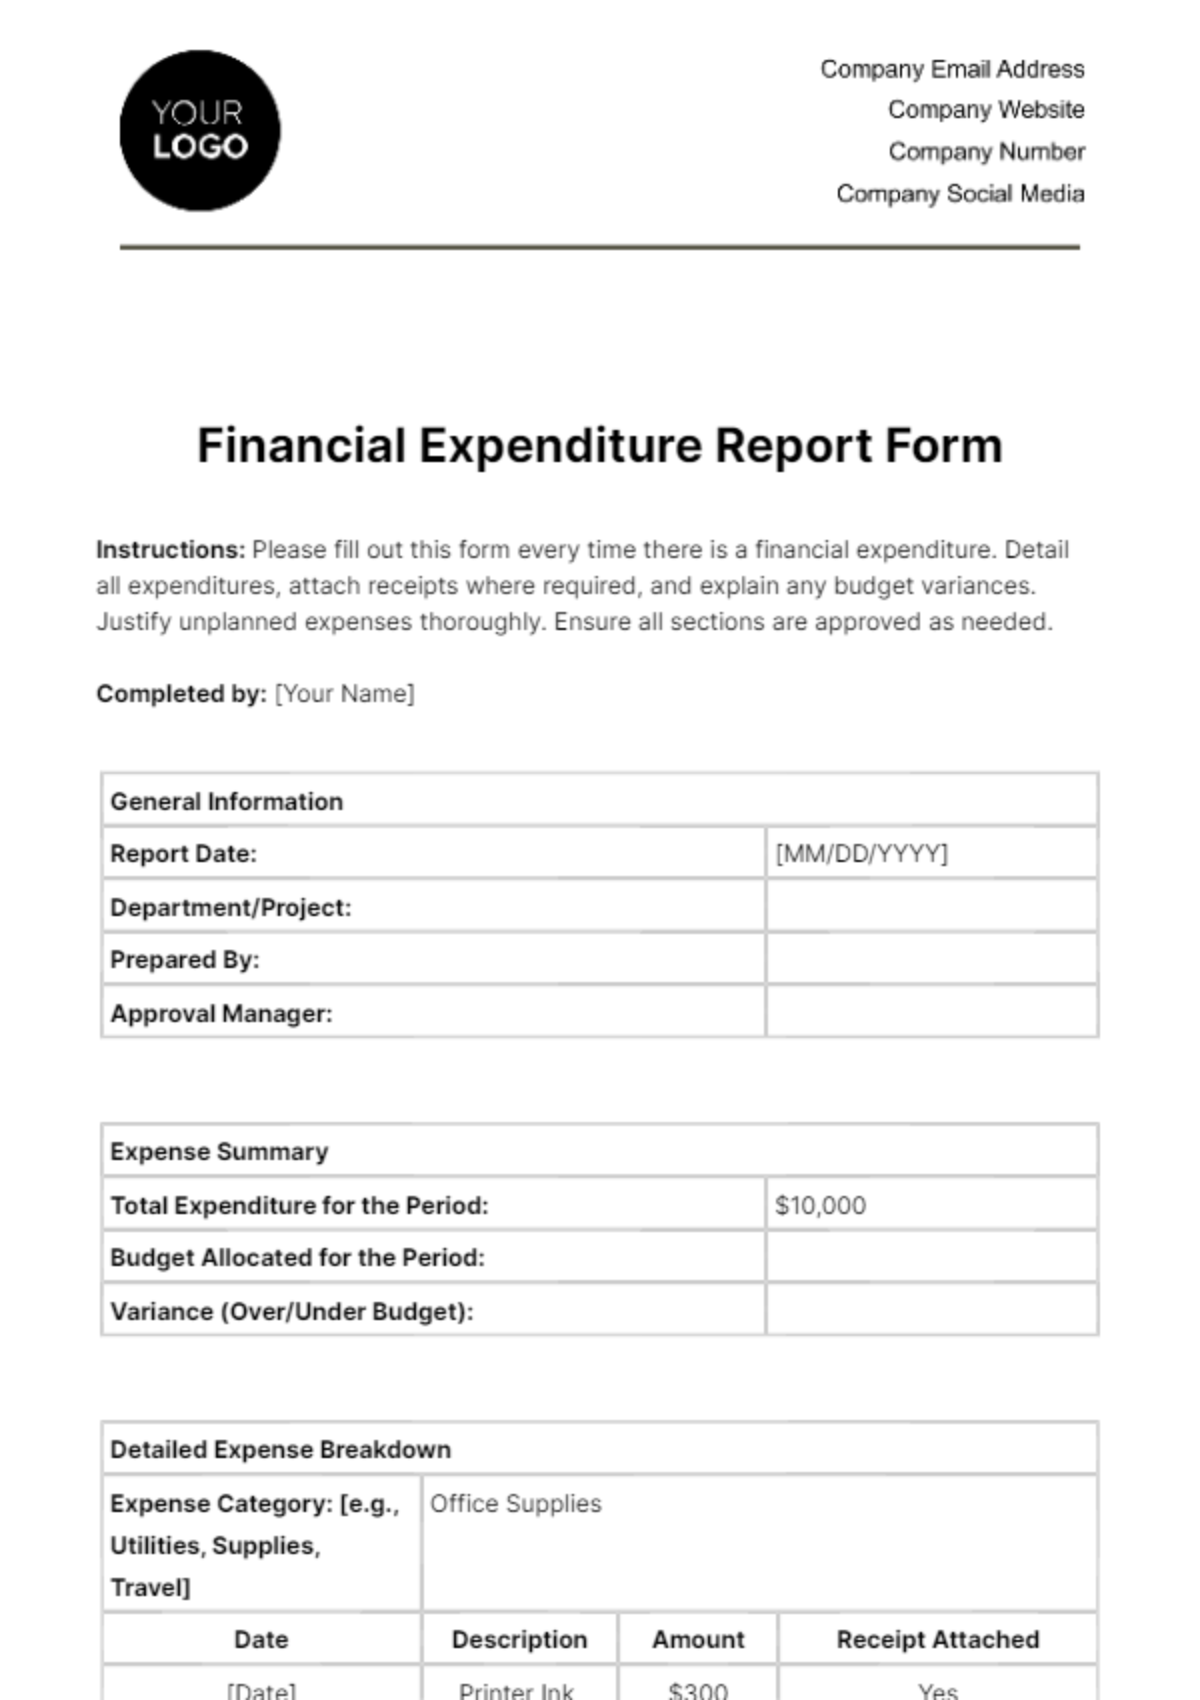 Free Financial Expenditure Report Form Template